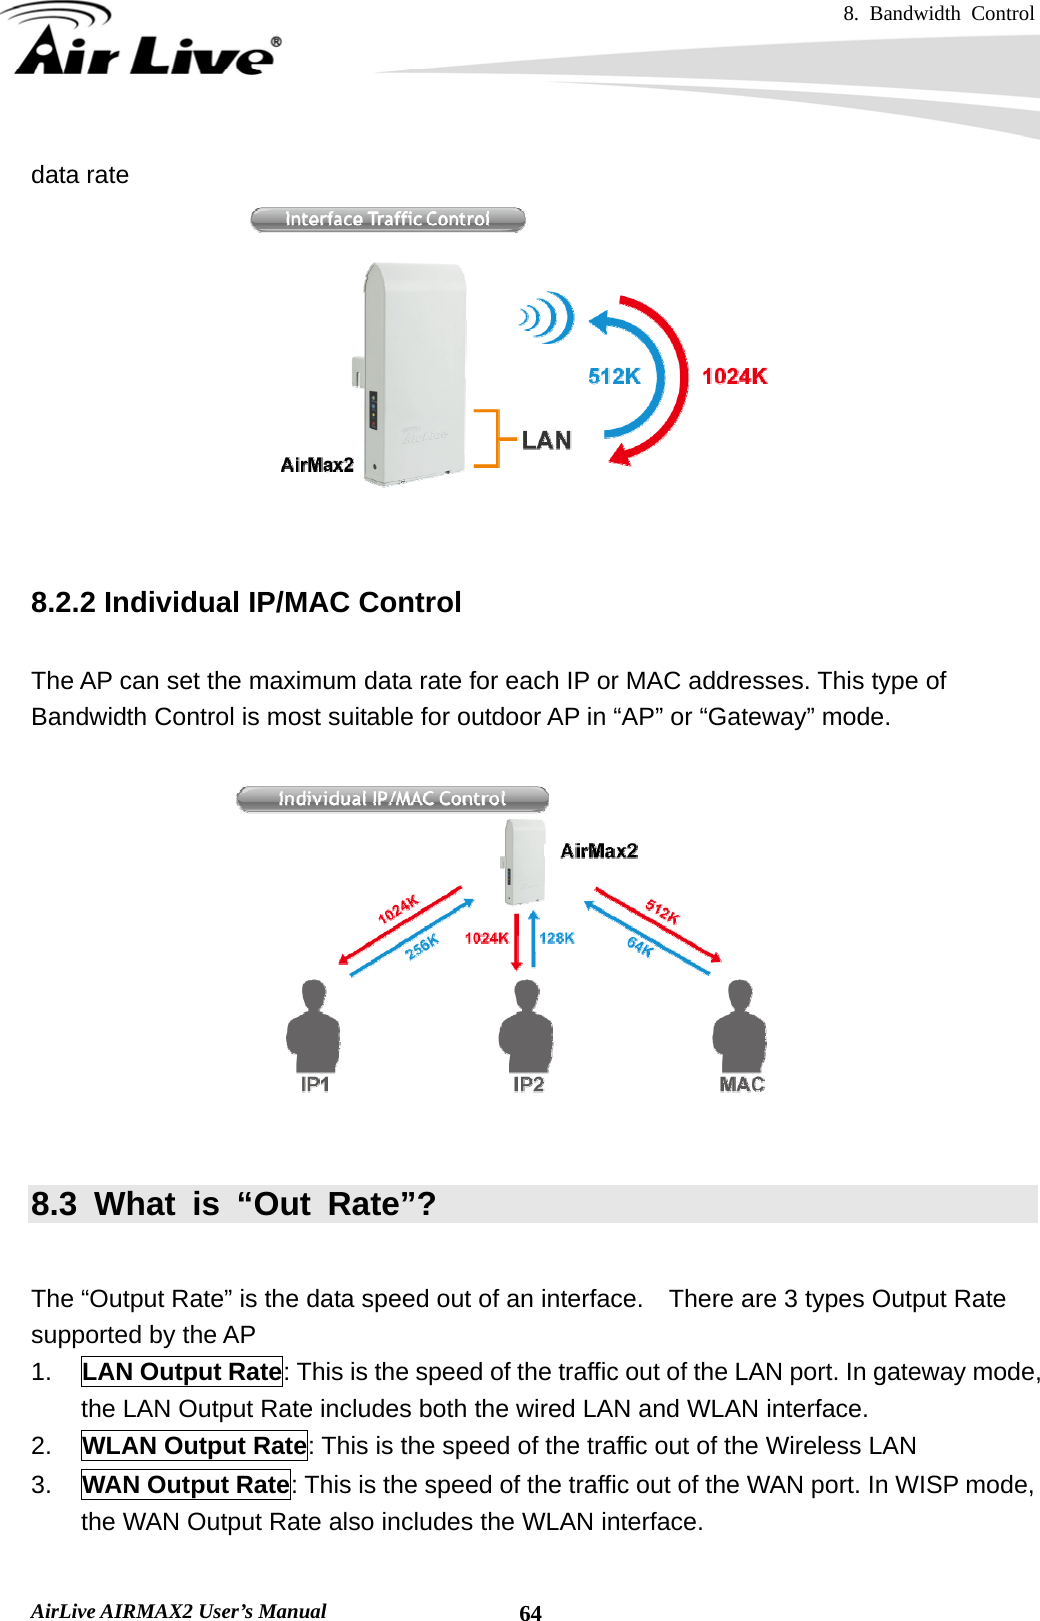 8. Bandwidth Control    AirLive AIRMAX2 User’s Manual  64data rate     8.2.2 Individual IP/MAC Control  The AP can set the maximum data rate for each IP or MAC addresses. This type of Bandwidth Control is most suitable for outdoor AP in “AP” or “Gateway” mode.    8.3 What is “Out Rate”?  The “Output Rate” is the data speed out of an interface.    There are 3 types Output Rate supported by the AP 1.  LAN Output Rate: This is the speed of the traffic out of the LAN port. In gateway mode, the LAN Output Rate includes both the wired LAN and WLAN interface. 2.  WLAN Output Rate: This is the speed of the traffic out of the Wireless LAN 3.  WAN Output Rate: This is the speed of the traffic out of the WAN port. In WISP mode, the WAN Output Rate also includes the WLAN interface.  